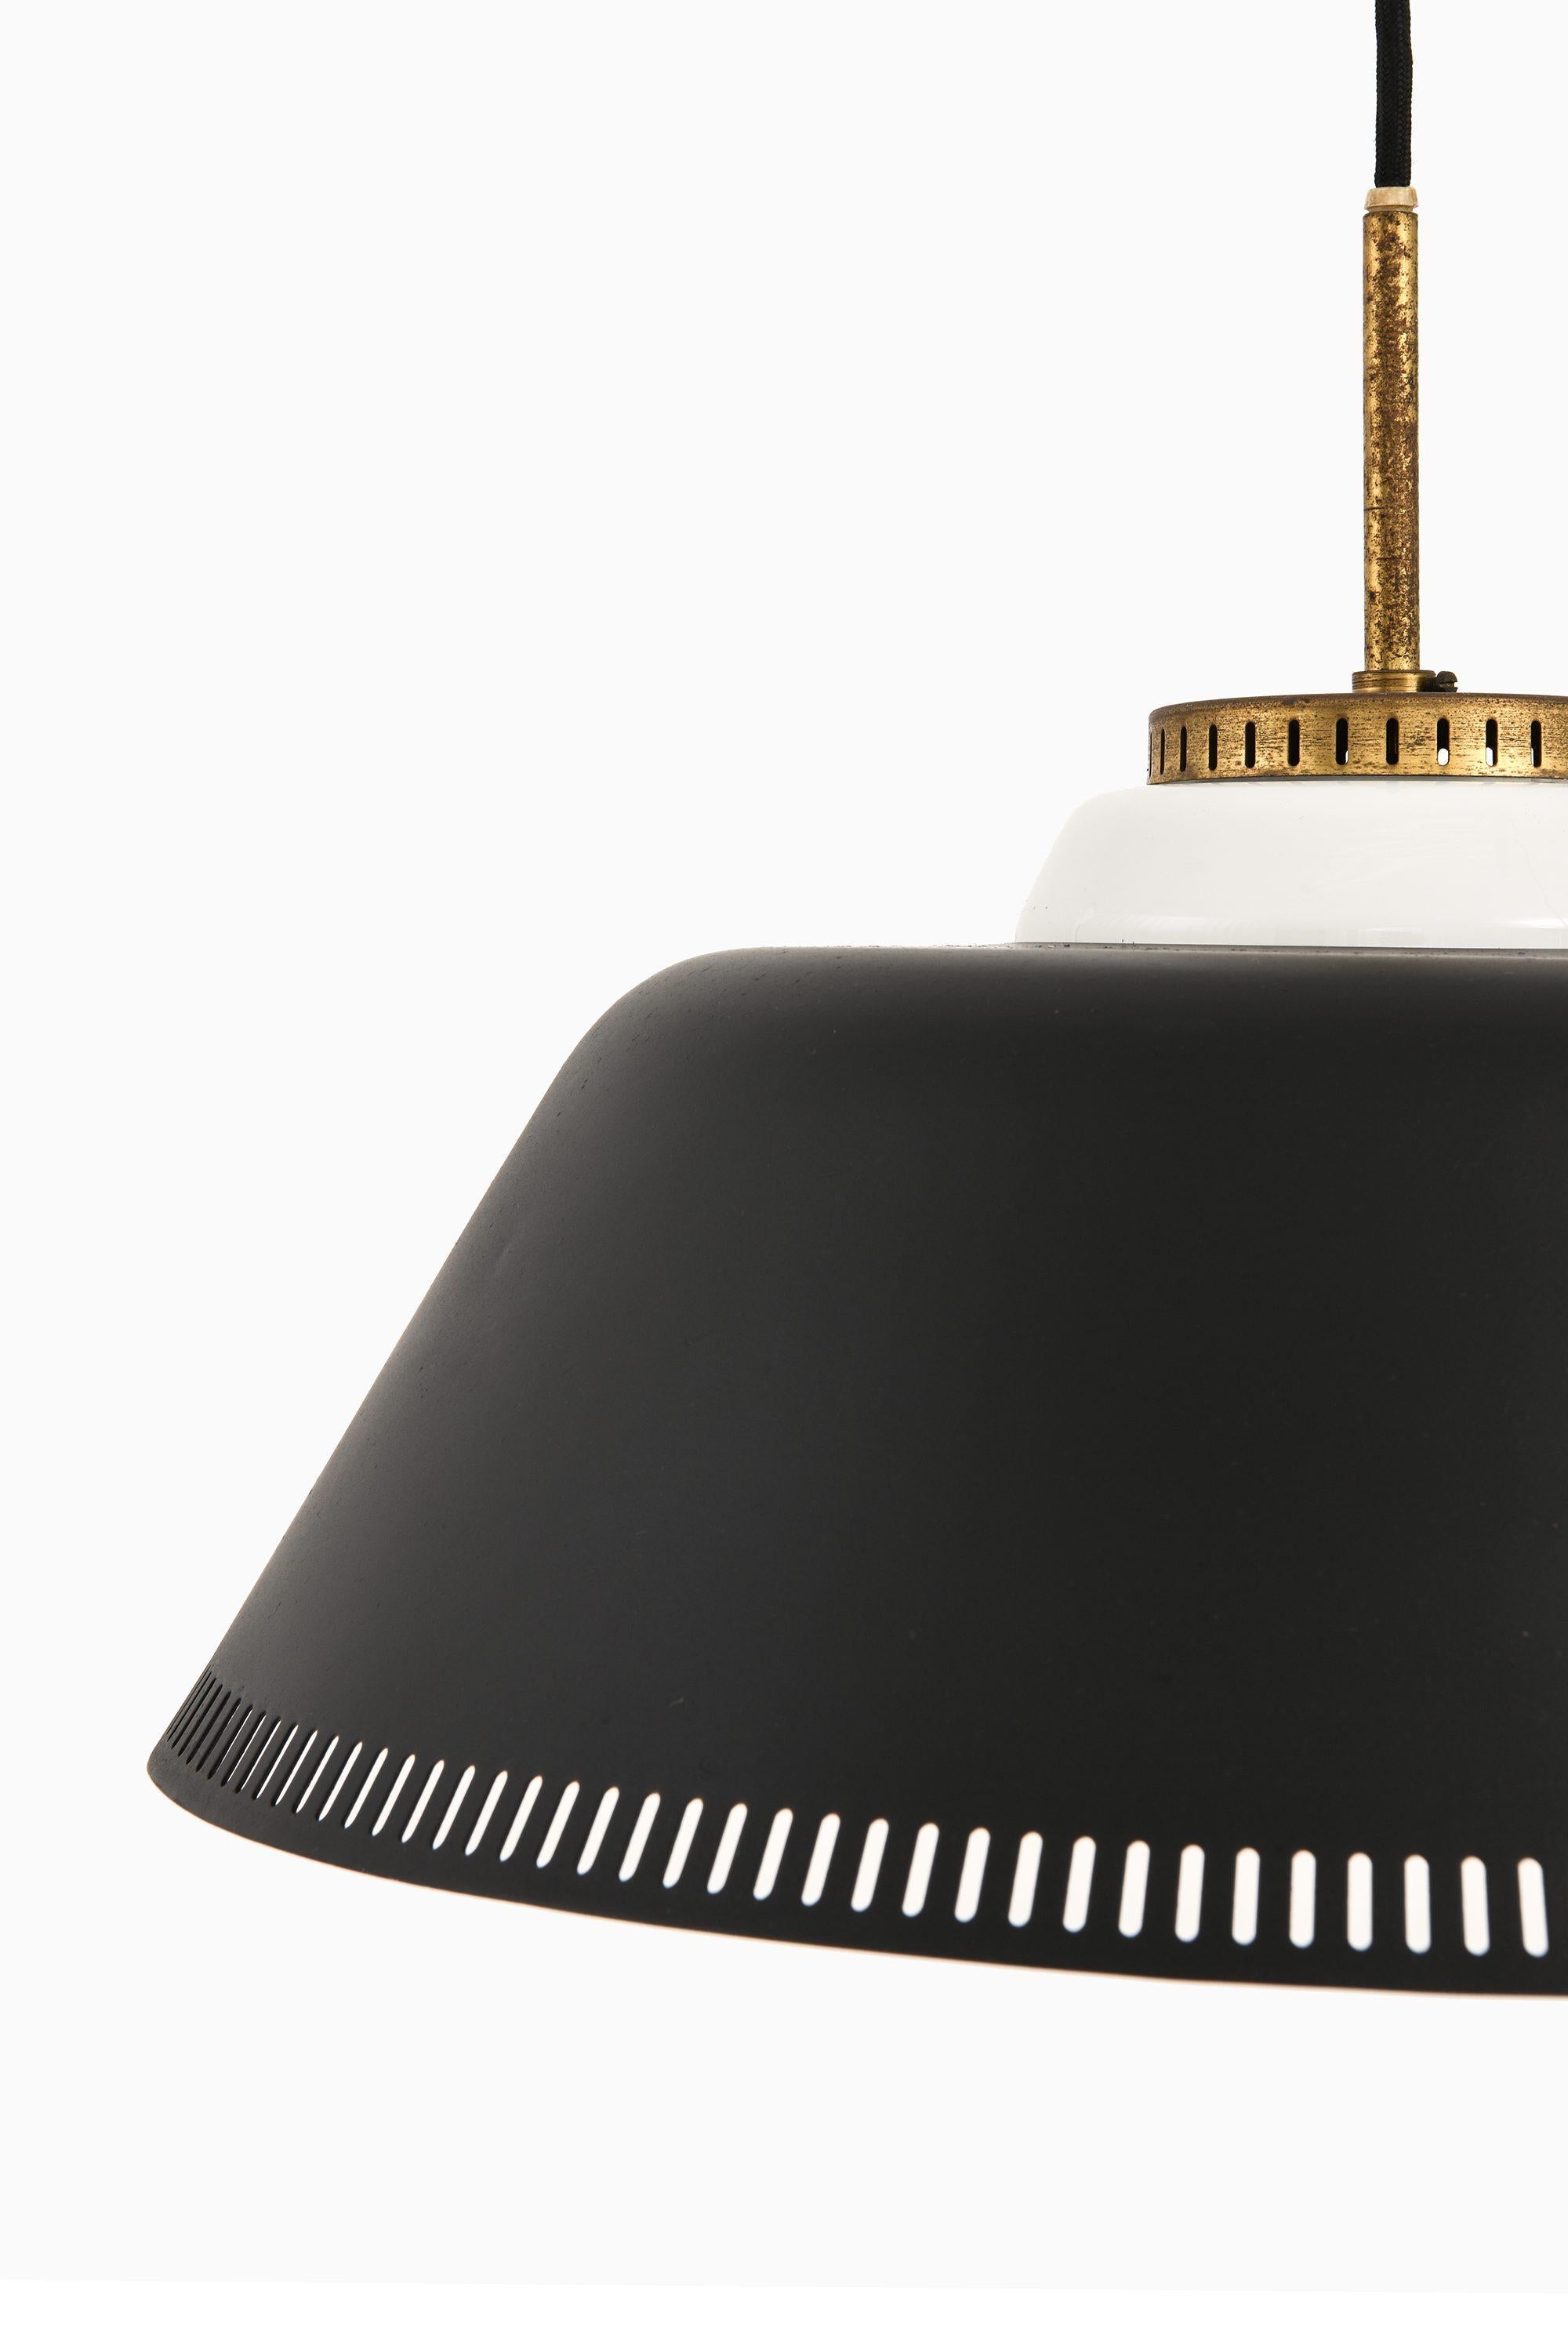 Ceiling Lamp in Brass, Black Lacquered Metal and Opaline Glass by Bent Karlby, 1950’s

Additional Information:
Material: Brass, black lacquered metal and opaline glass
Style: Mid century, Scandinavian
Produced by Lyfa in Denmark
Dimensions (W x D x